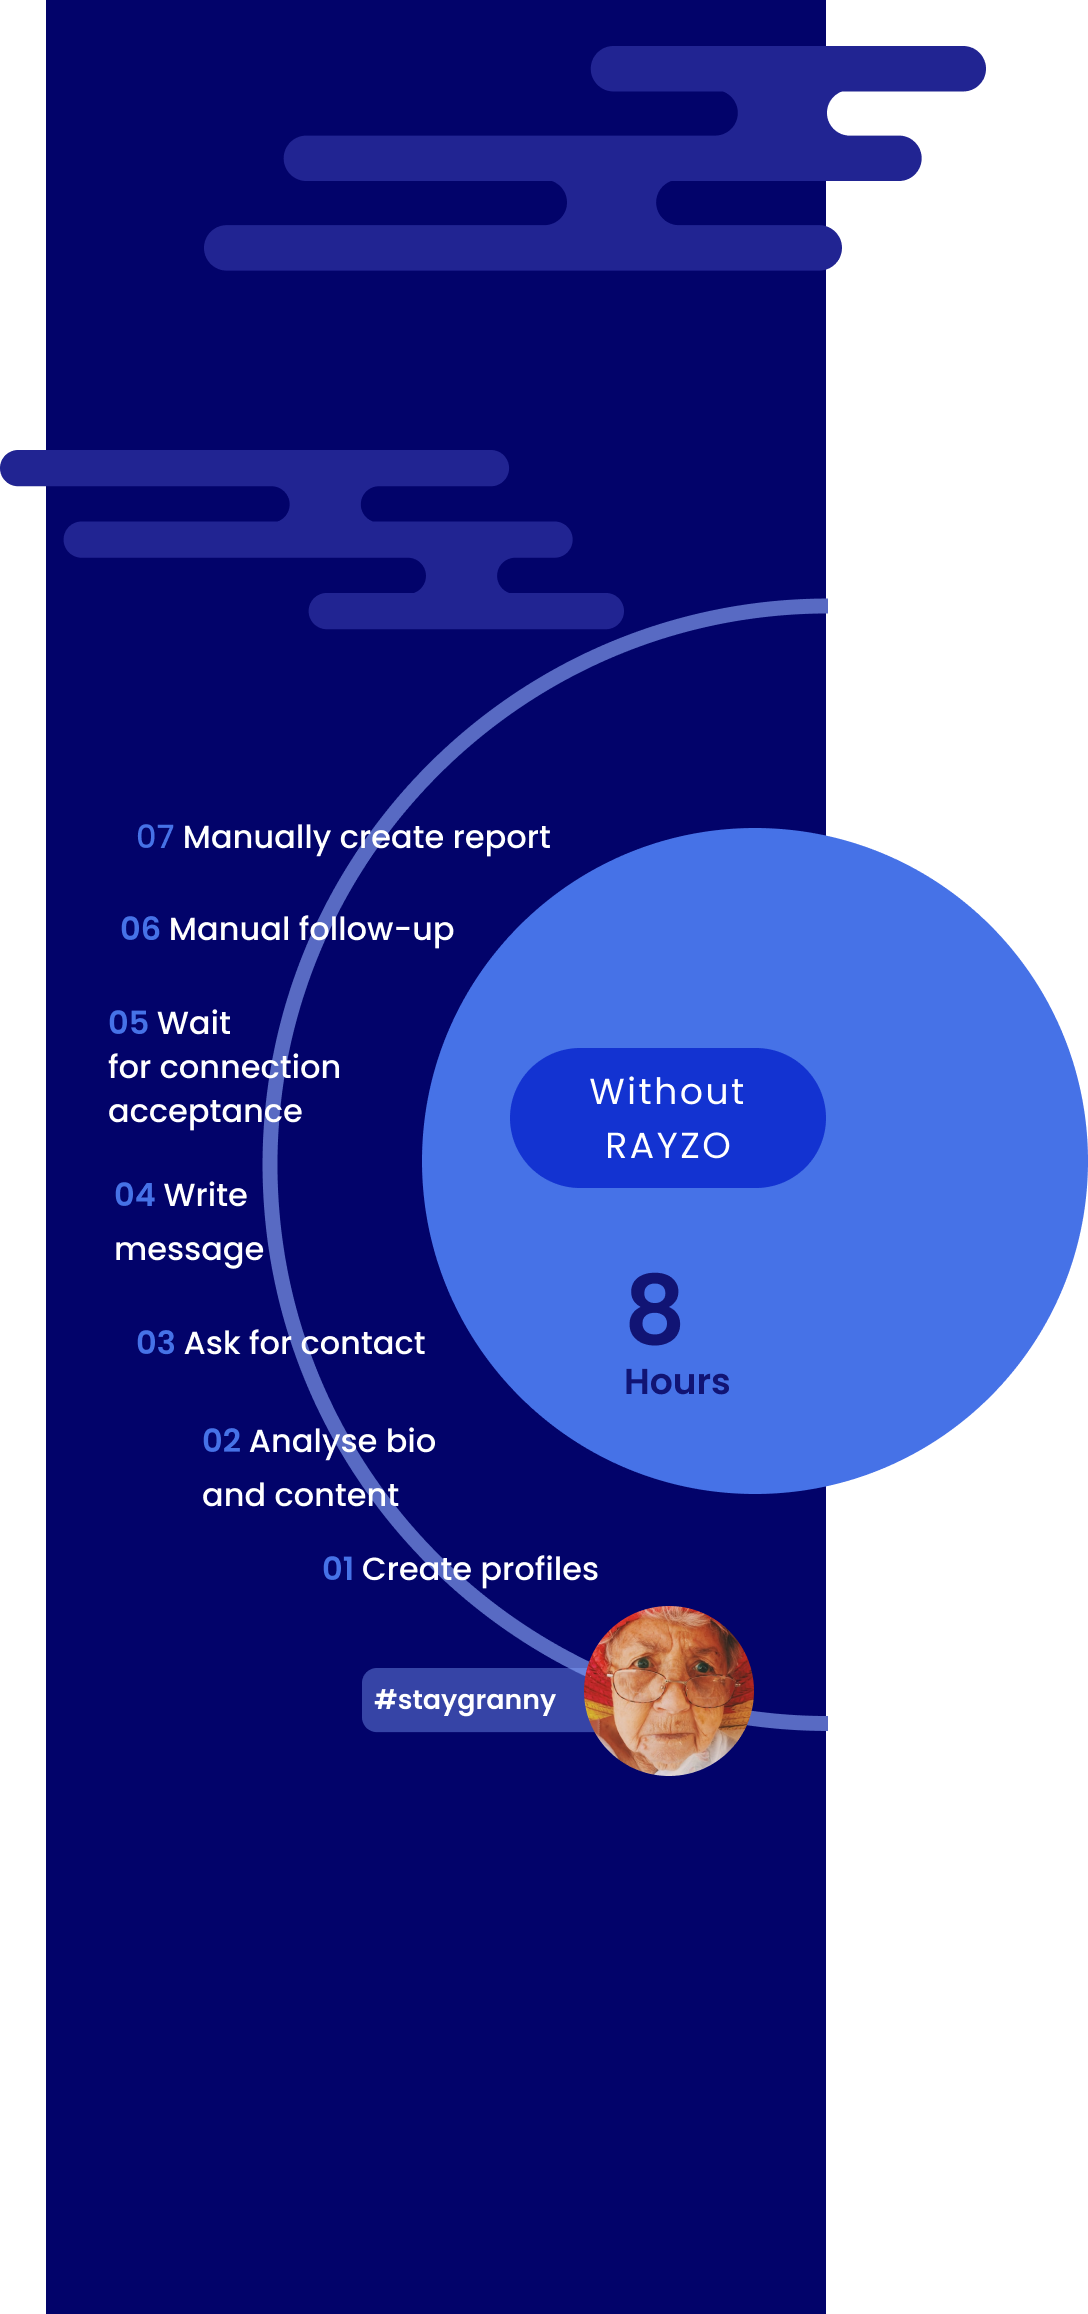 use-case-without-rayzo-mobile